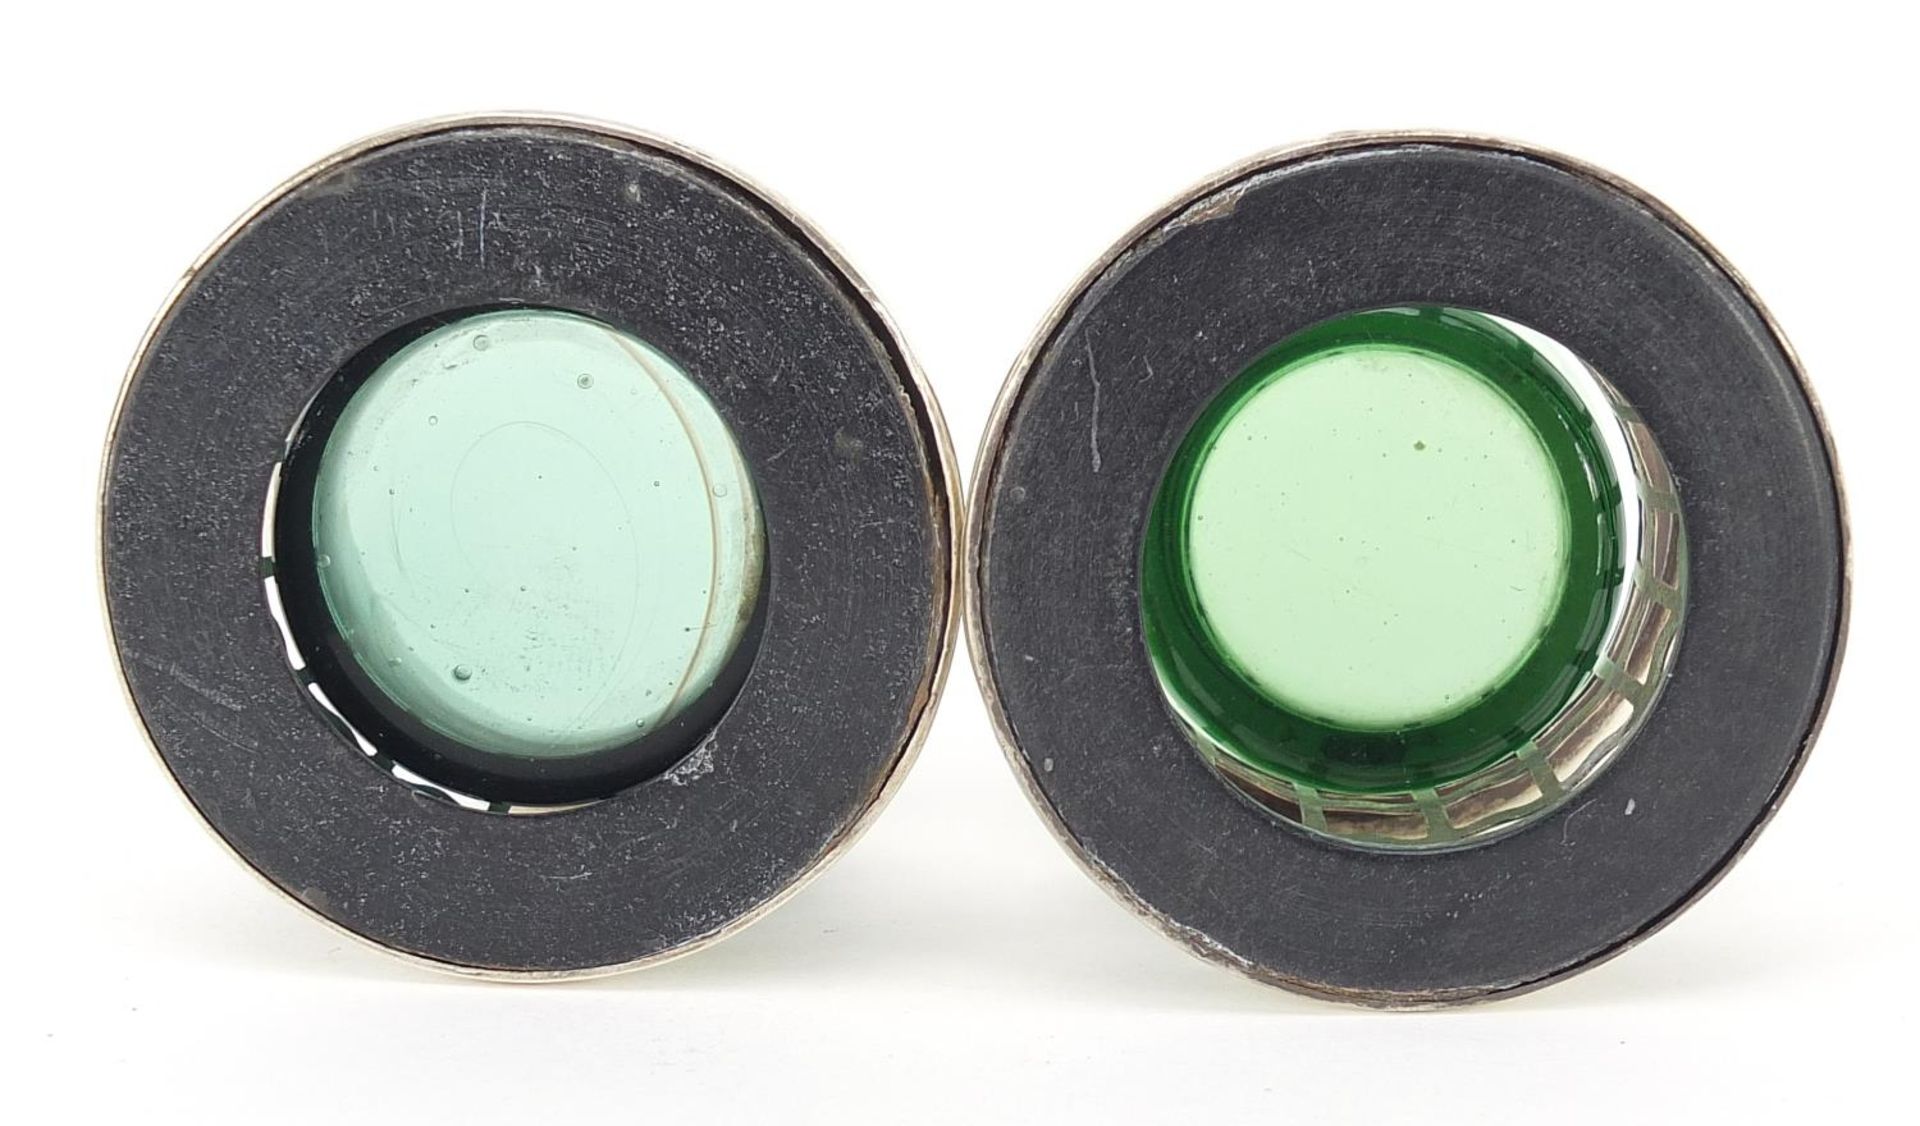 Pair of Edwardian pierced silver open salts with green glass liners, indistinct maker's mark - Image 4 of 4